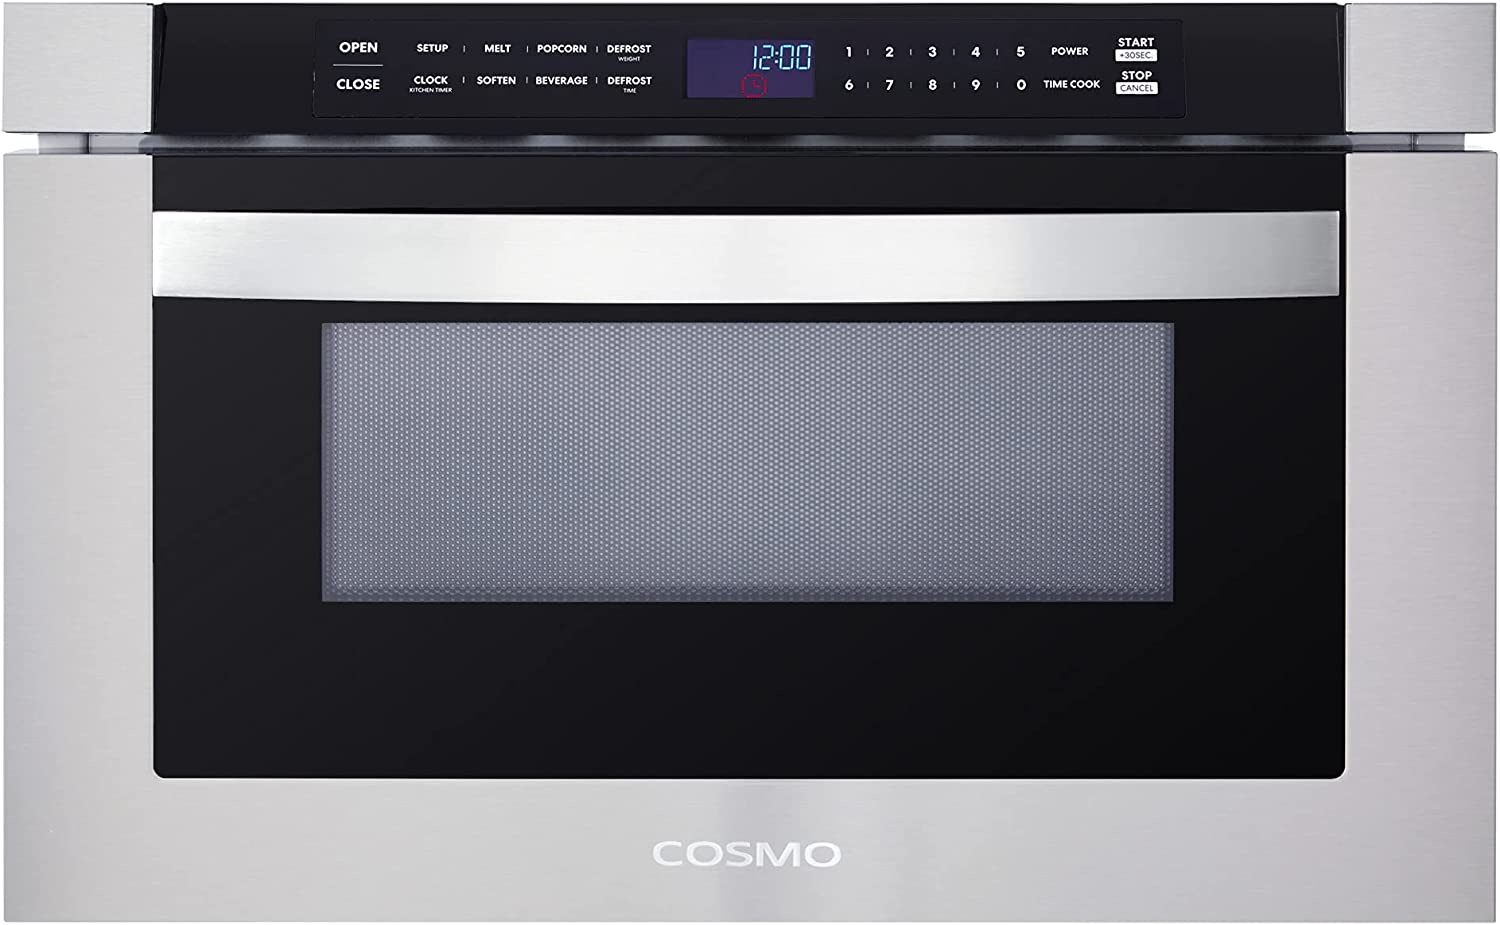 The Best Drawer Microwave for Your Kitchen